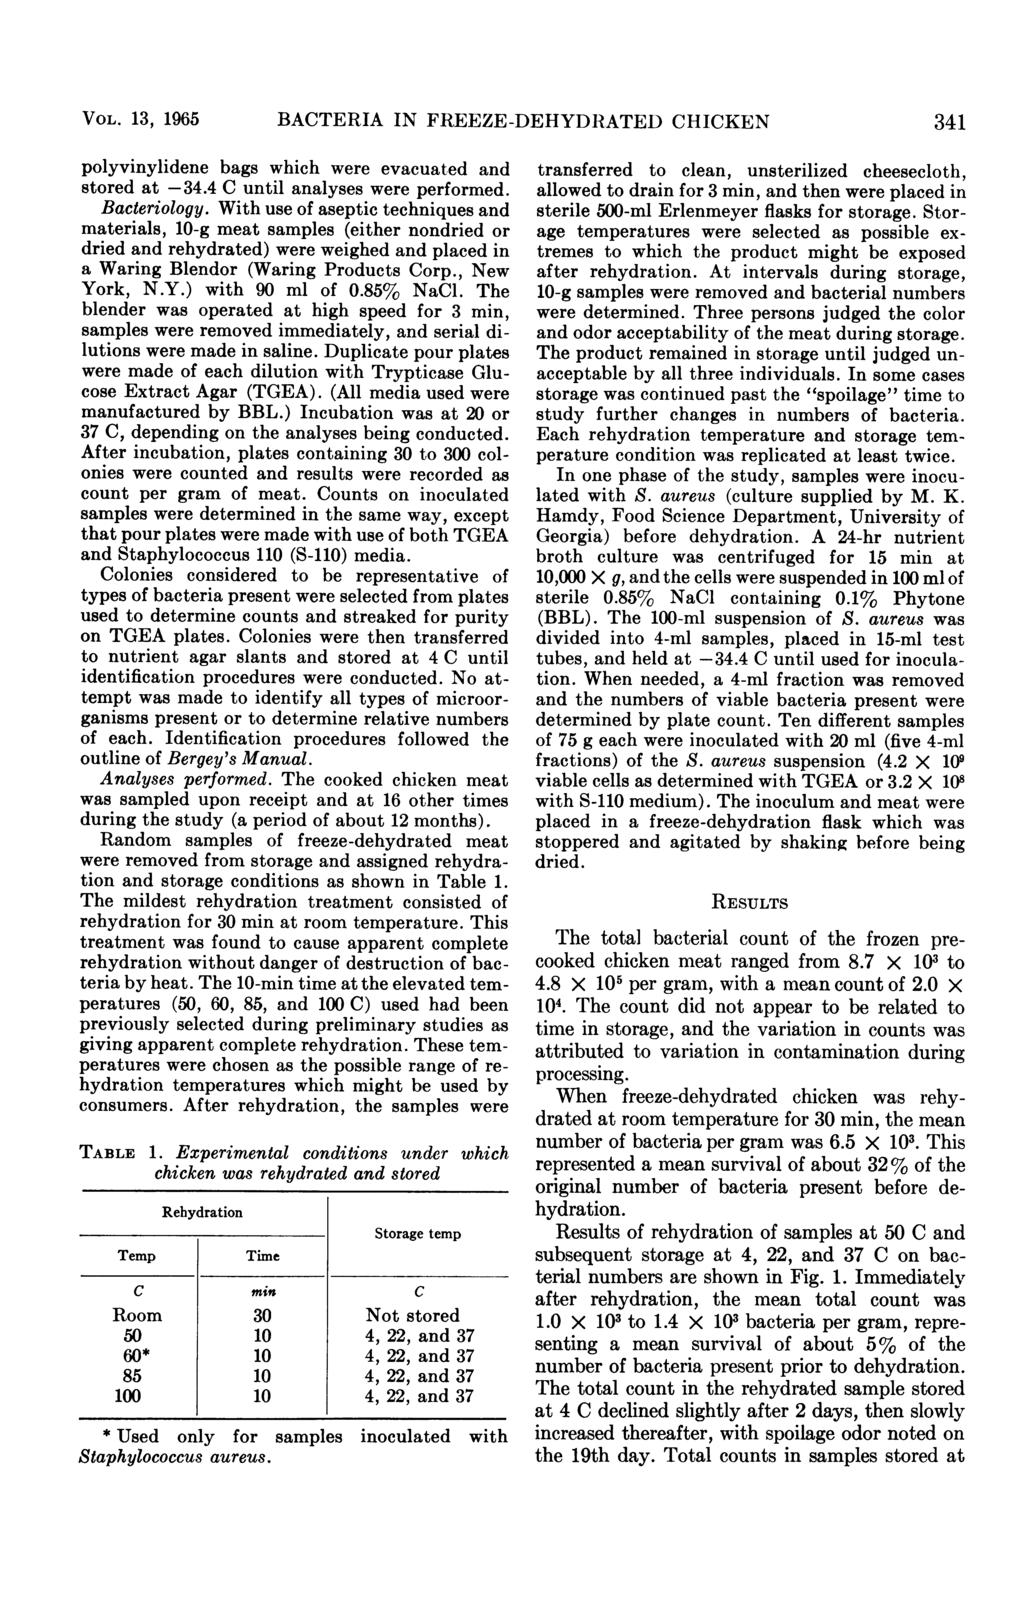 VOL. 13, 1965 BATERIA IN FREEZE-DEHYDRATED HIKEN 341 polyvinylidene bags which were evacuated and stored at -34.4 until analyses were performed. Bacteriology.